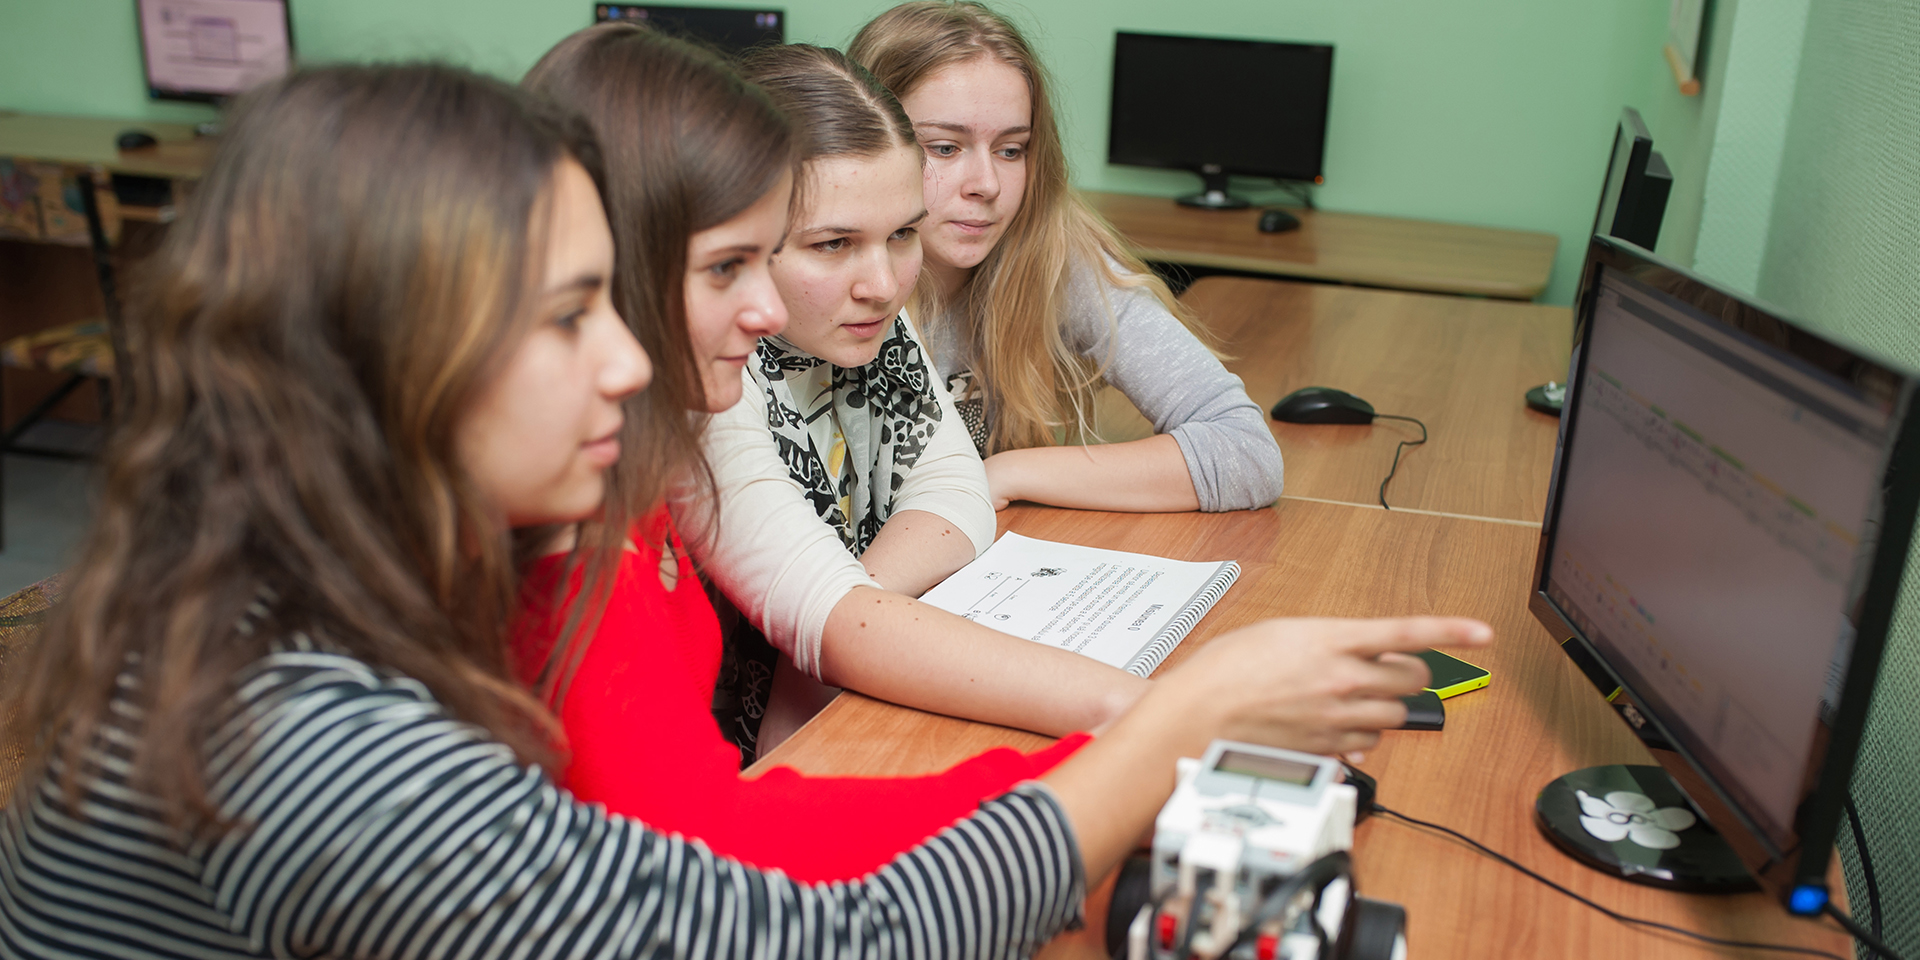 A group of four girls sitting in front of a computer monitor as one points out something on the screen.